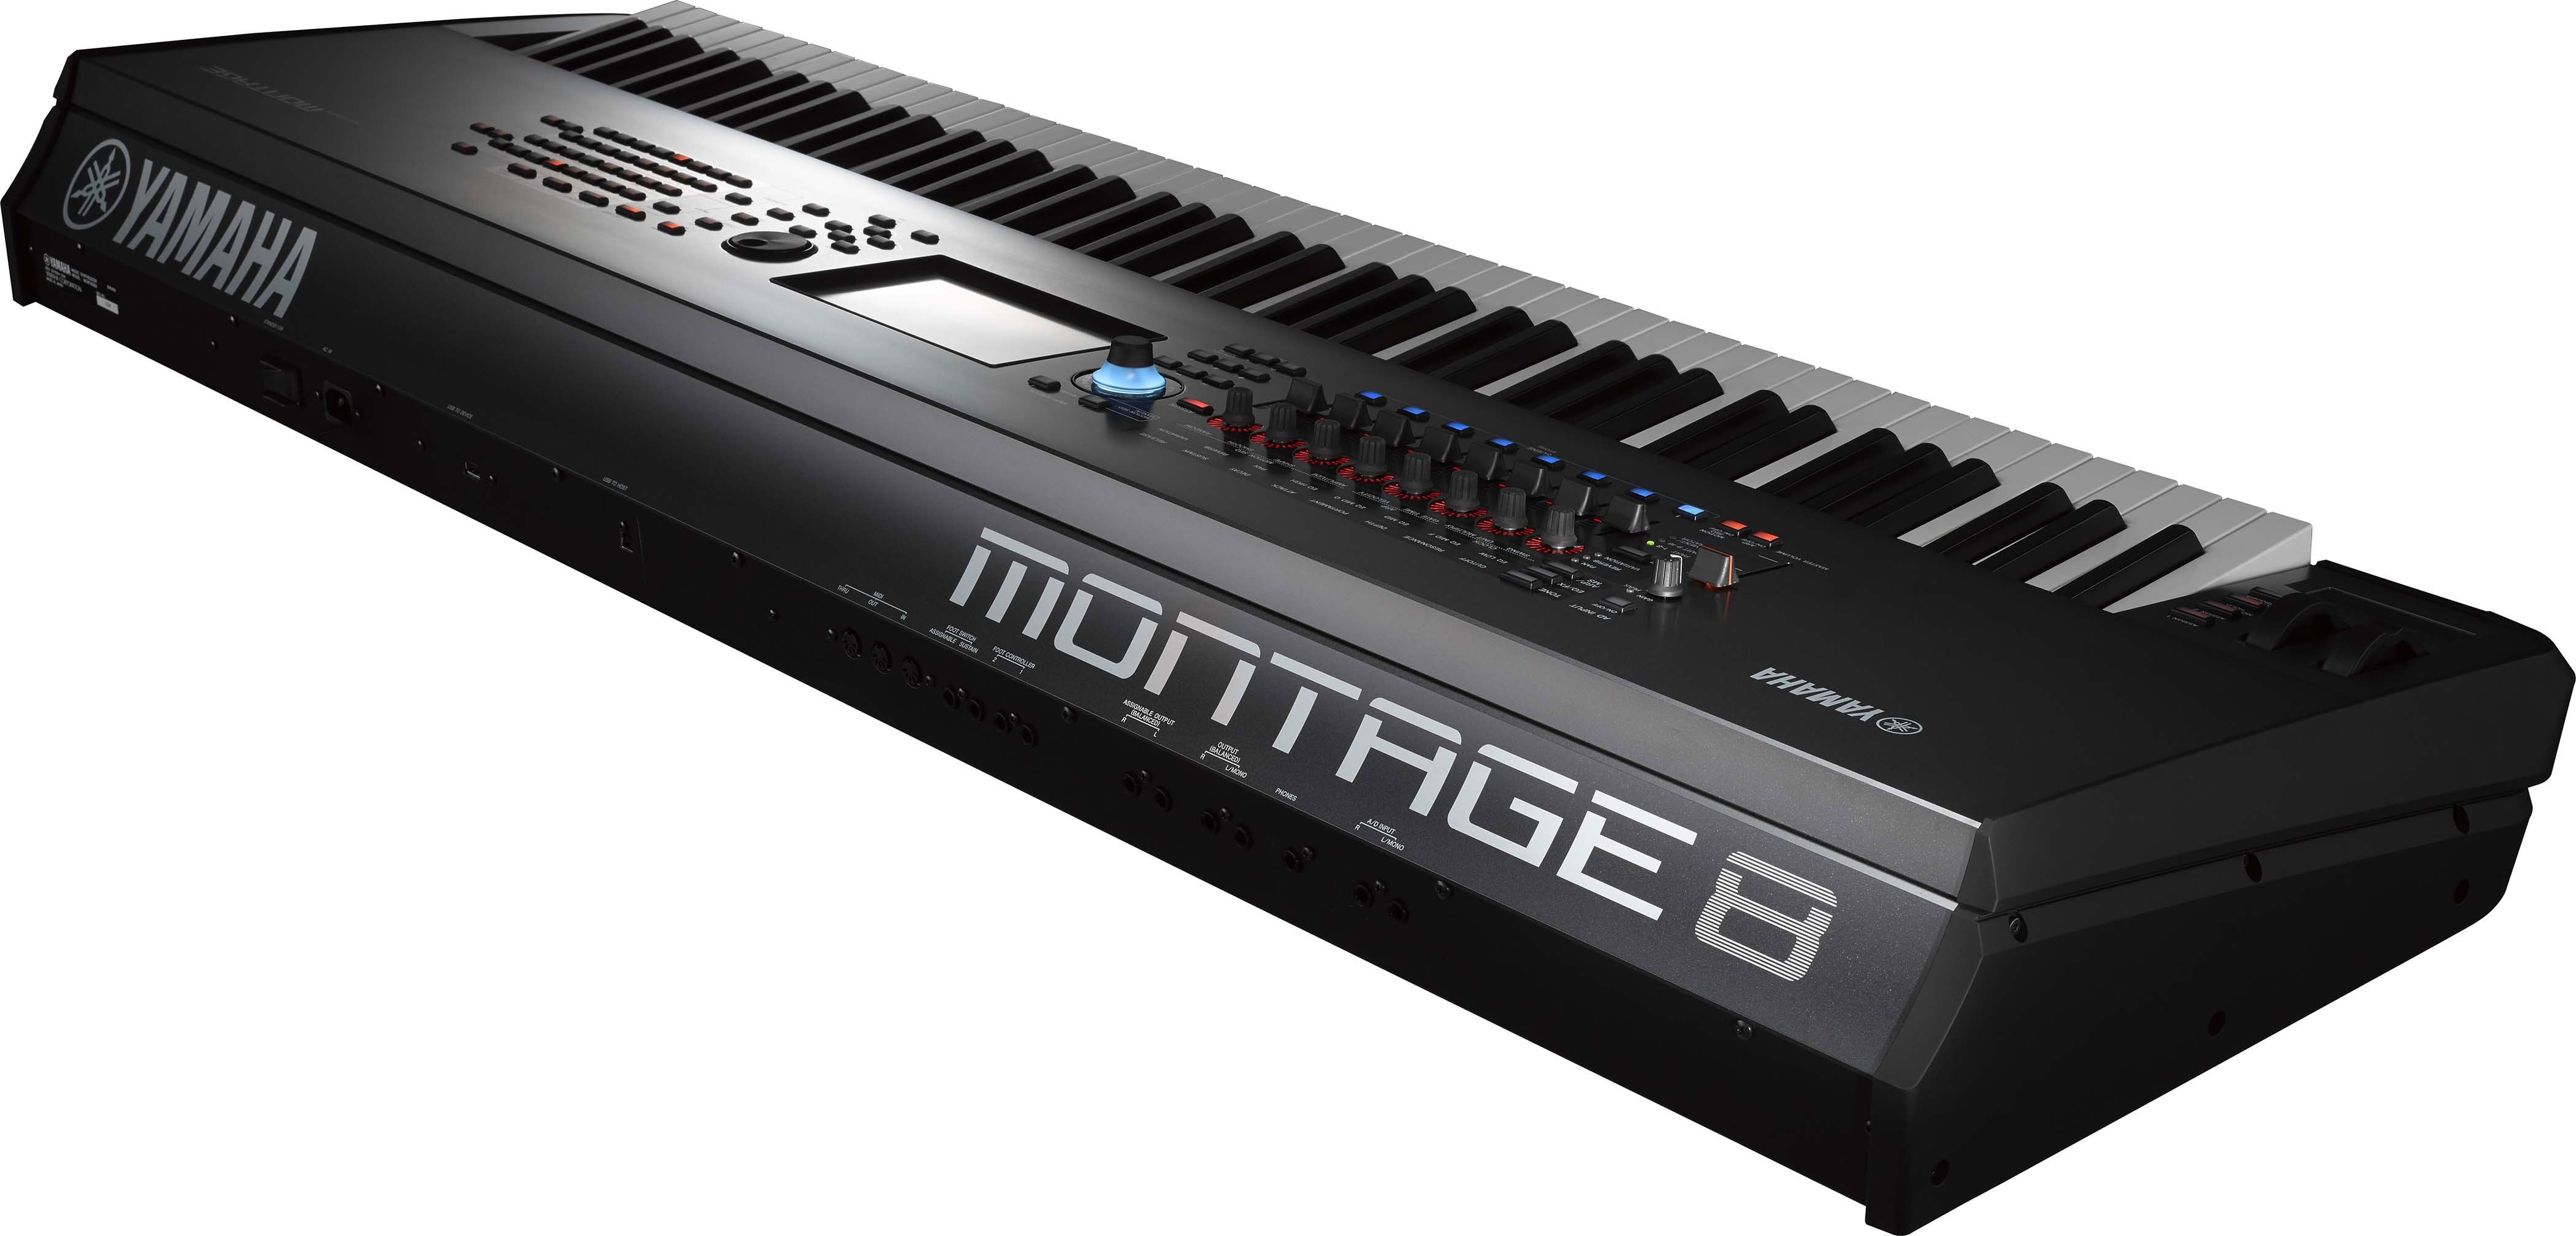 yamaha montage 8 price in india